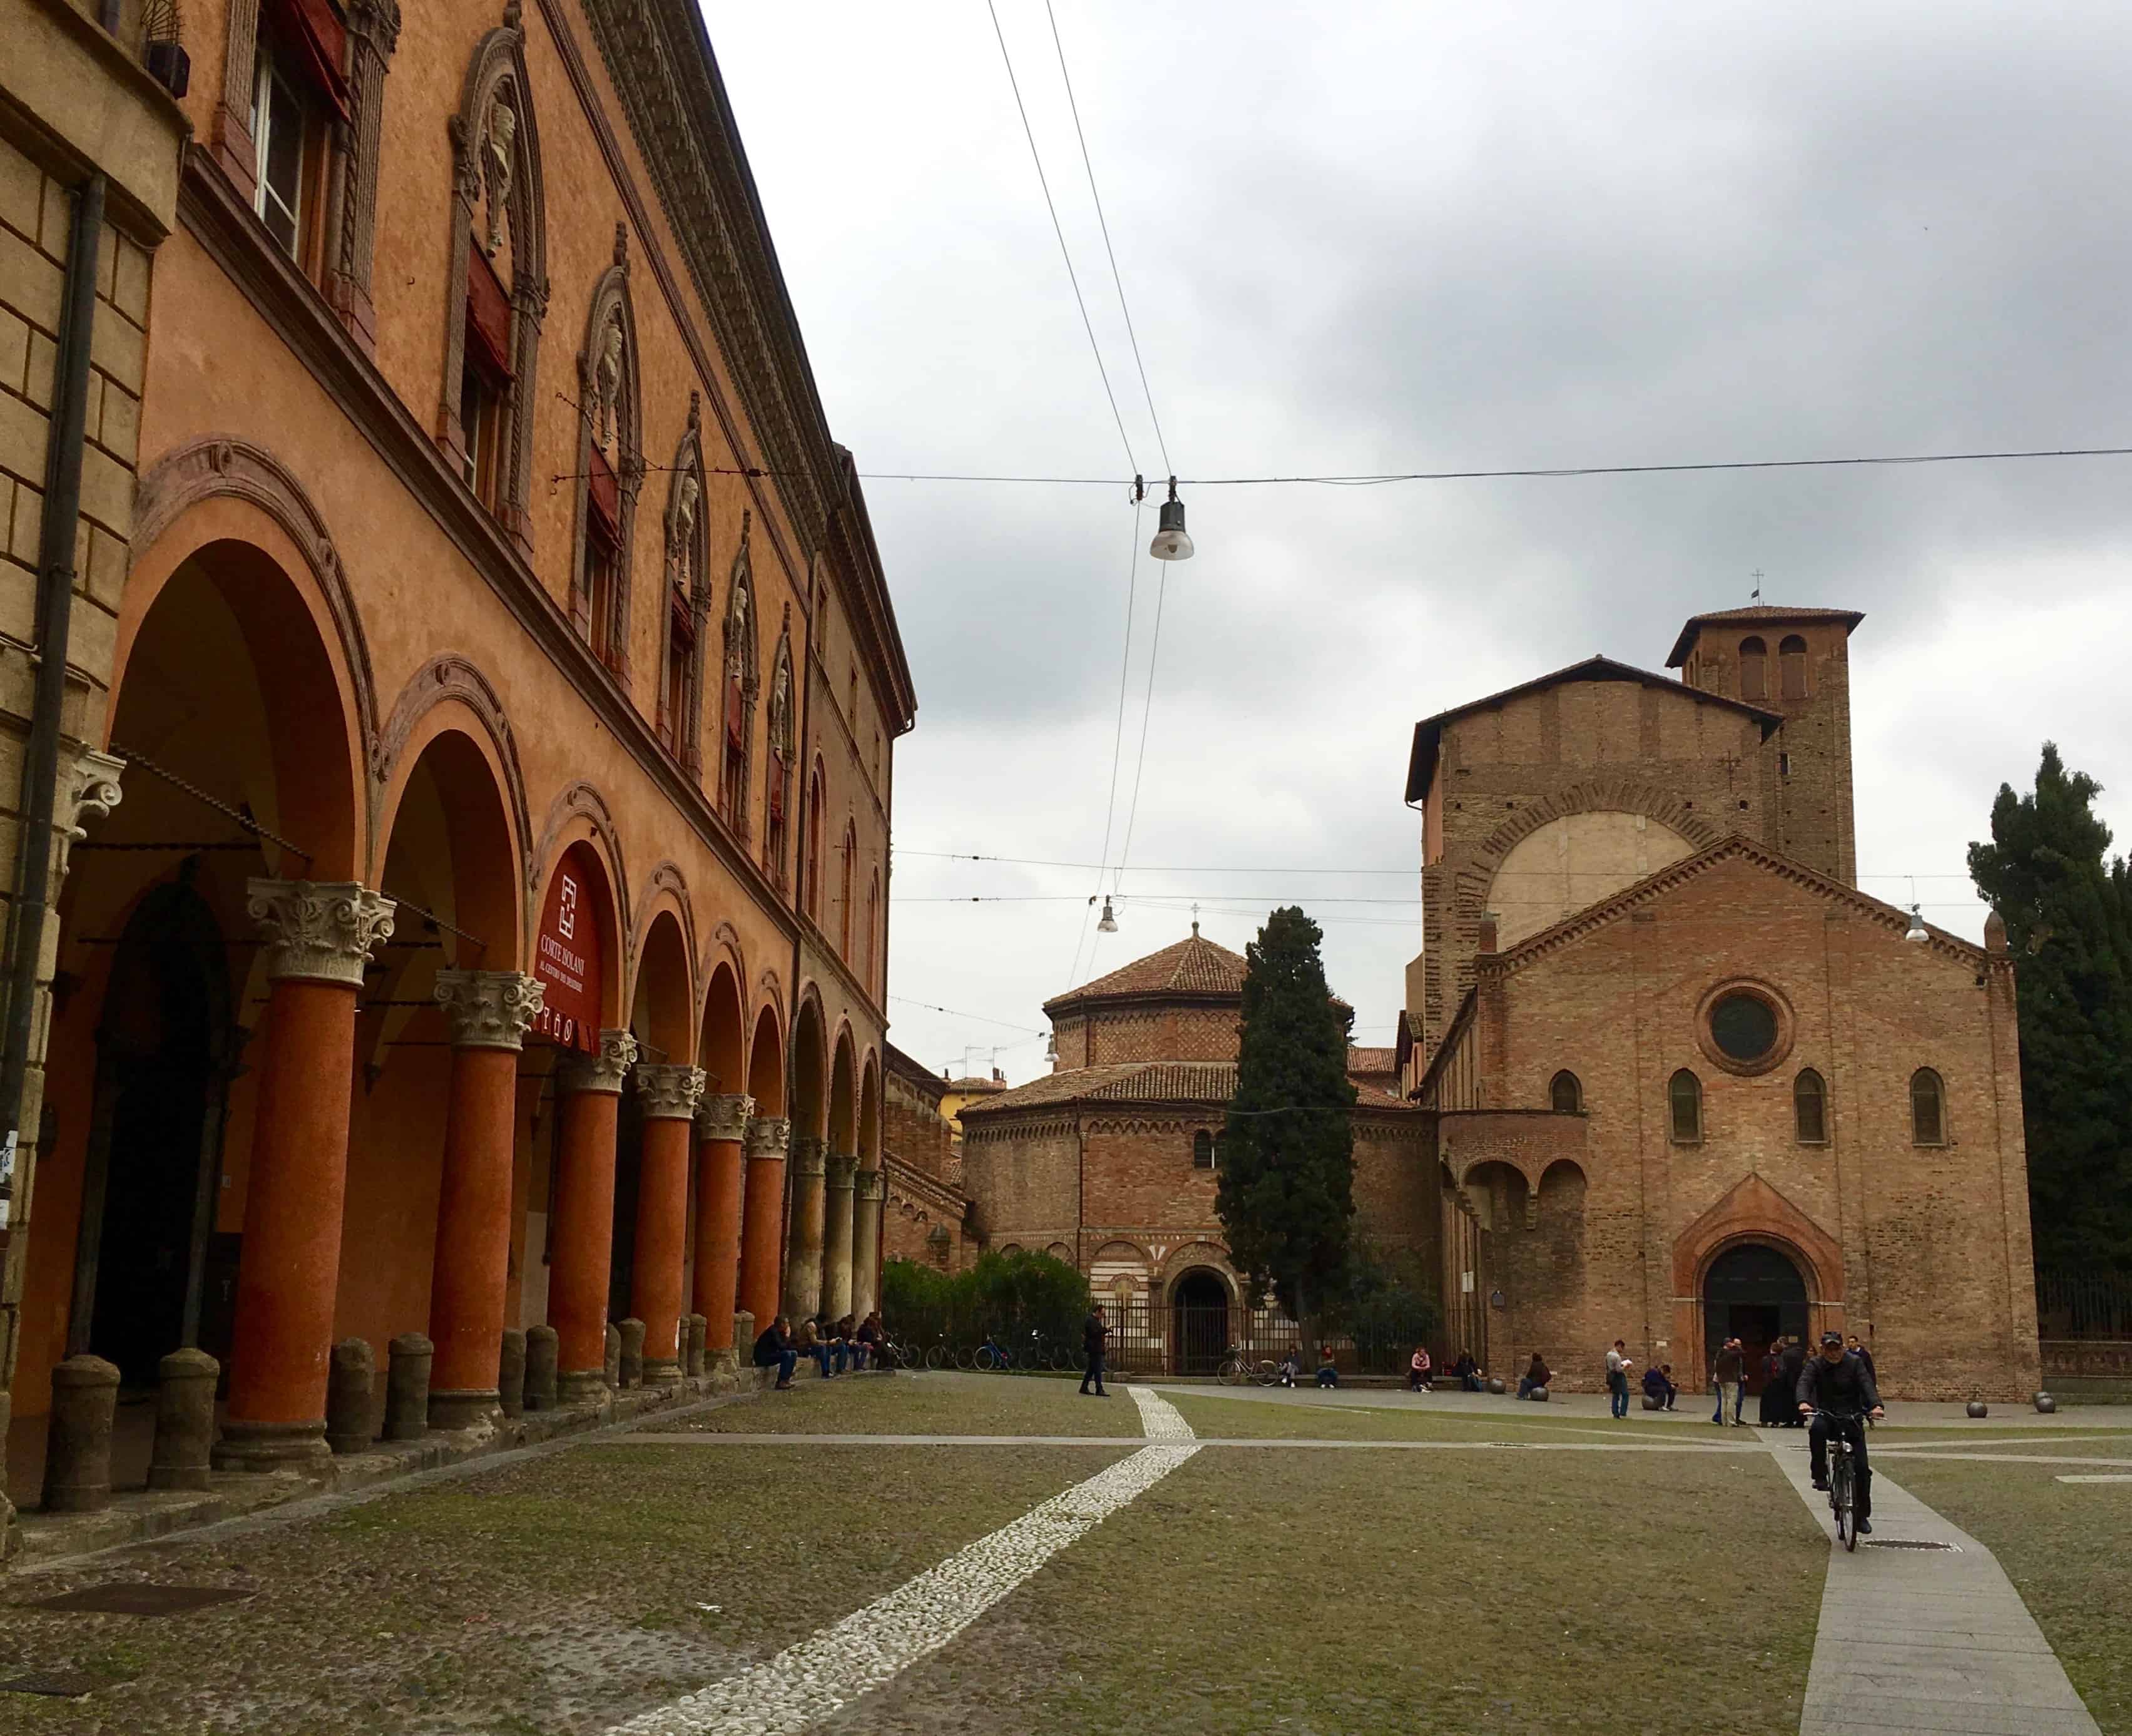 The multifaceted facade of the Abbazia di Santo Stefano, also known as Sette Chiese - Seven Churches